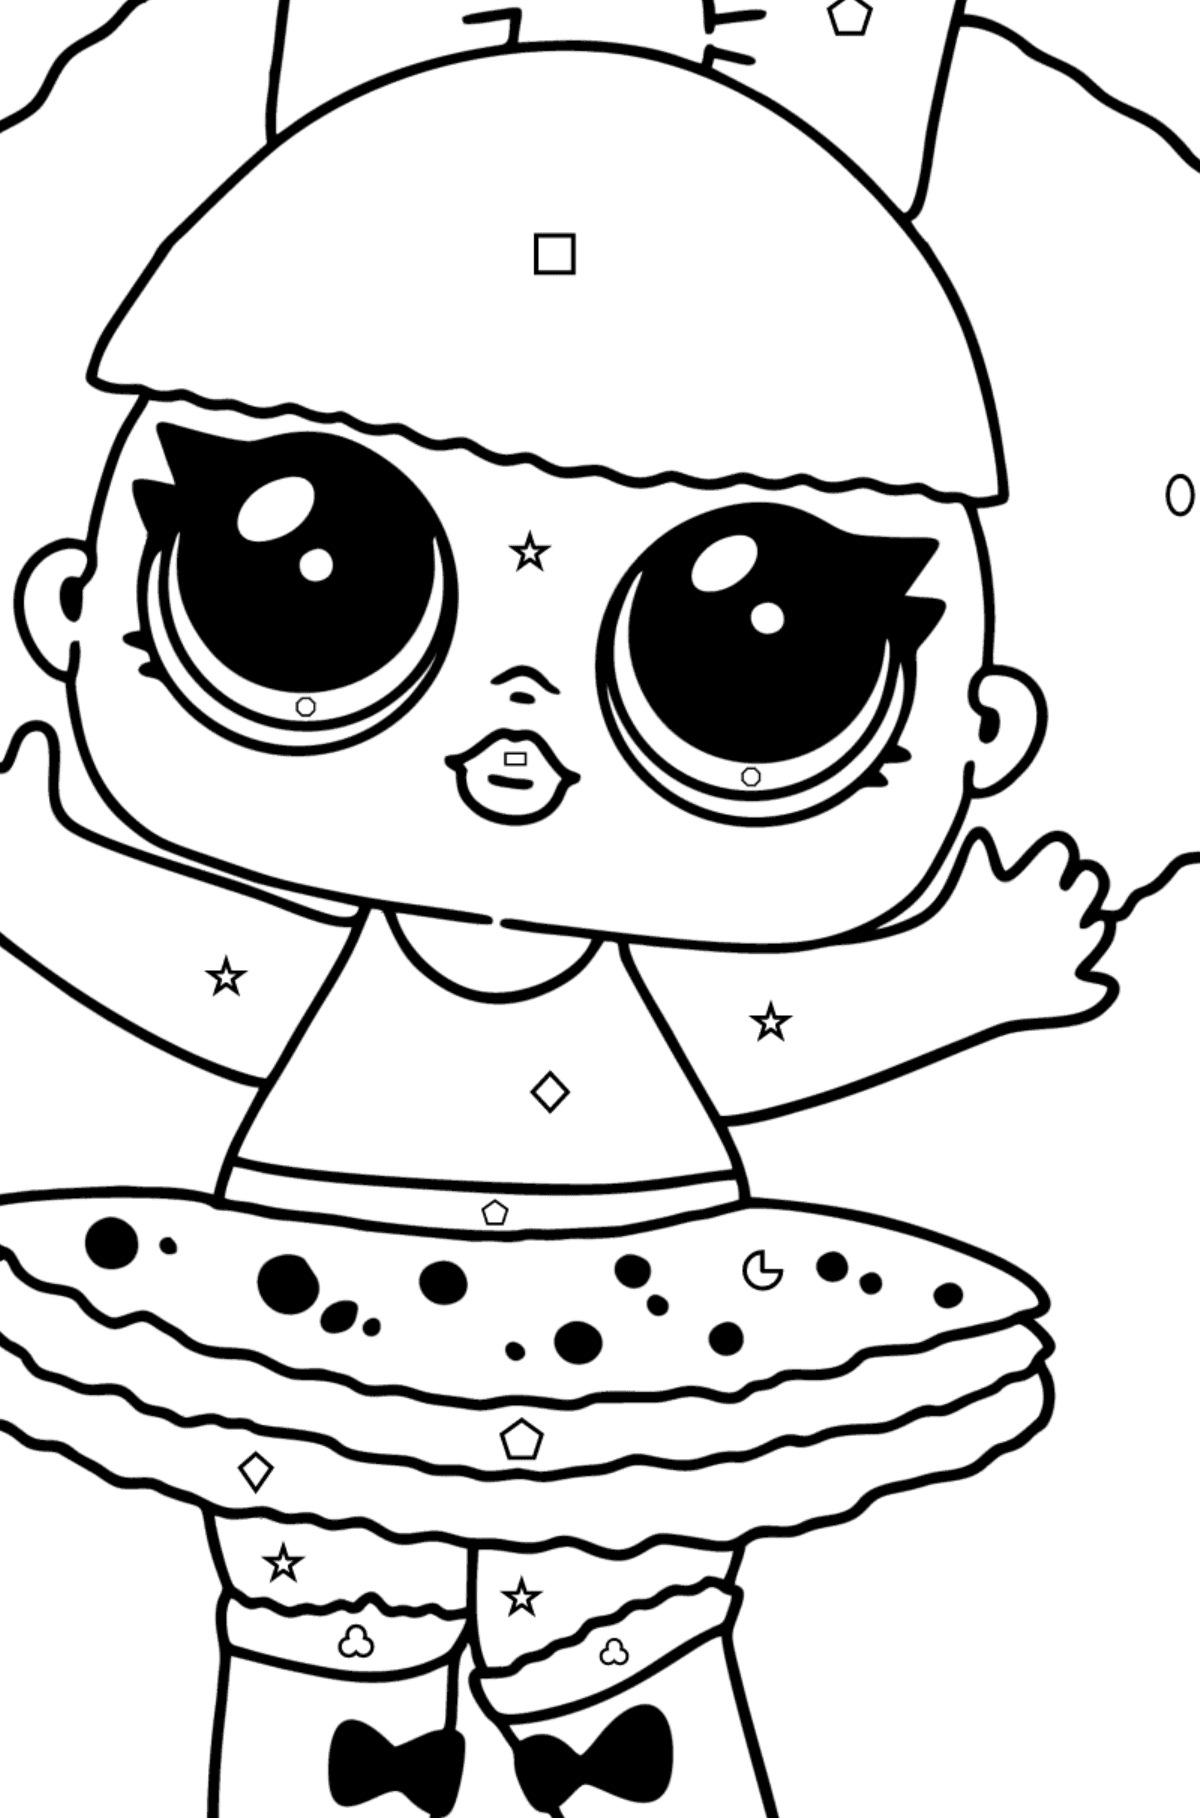 LOL Surprise Diva coloring page - Coloring by Geometric Shapes for Kids